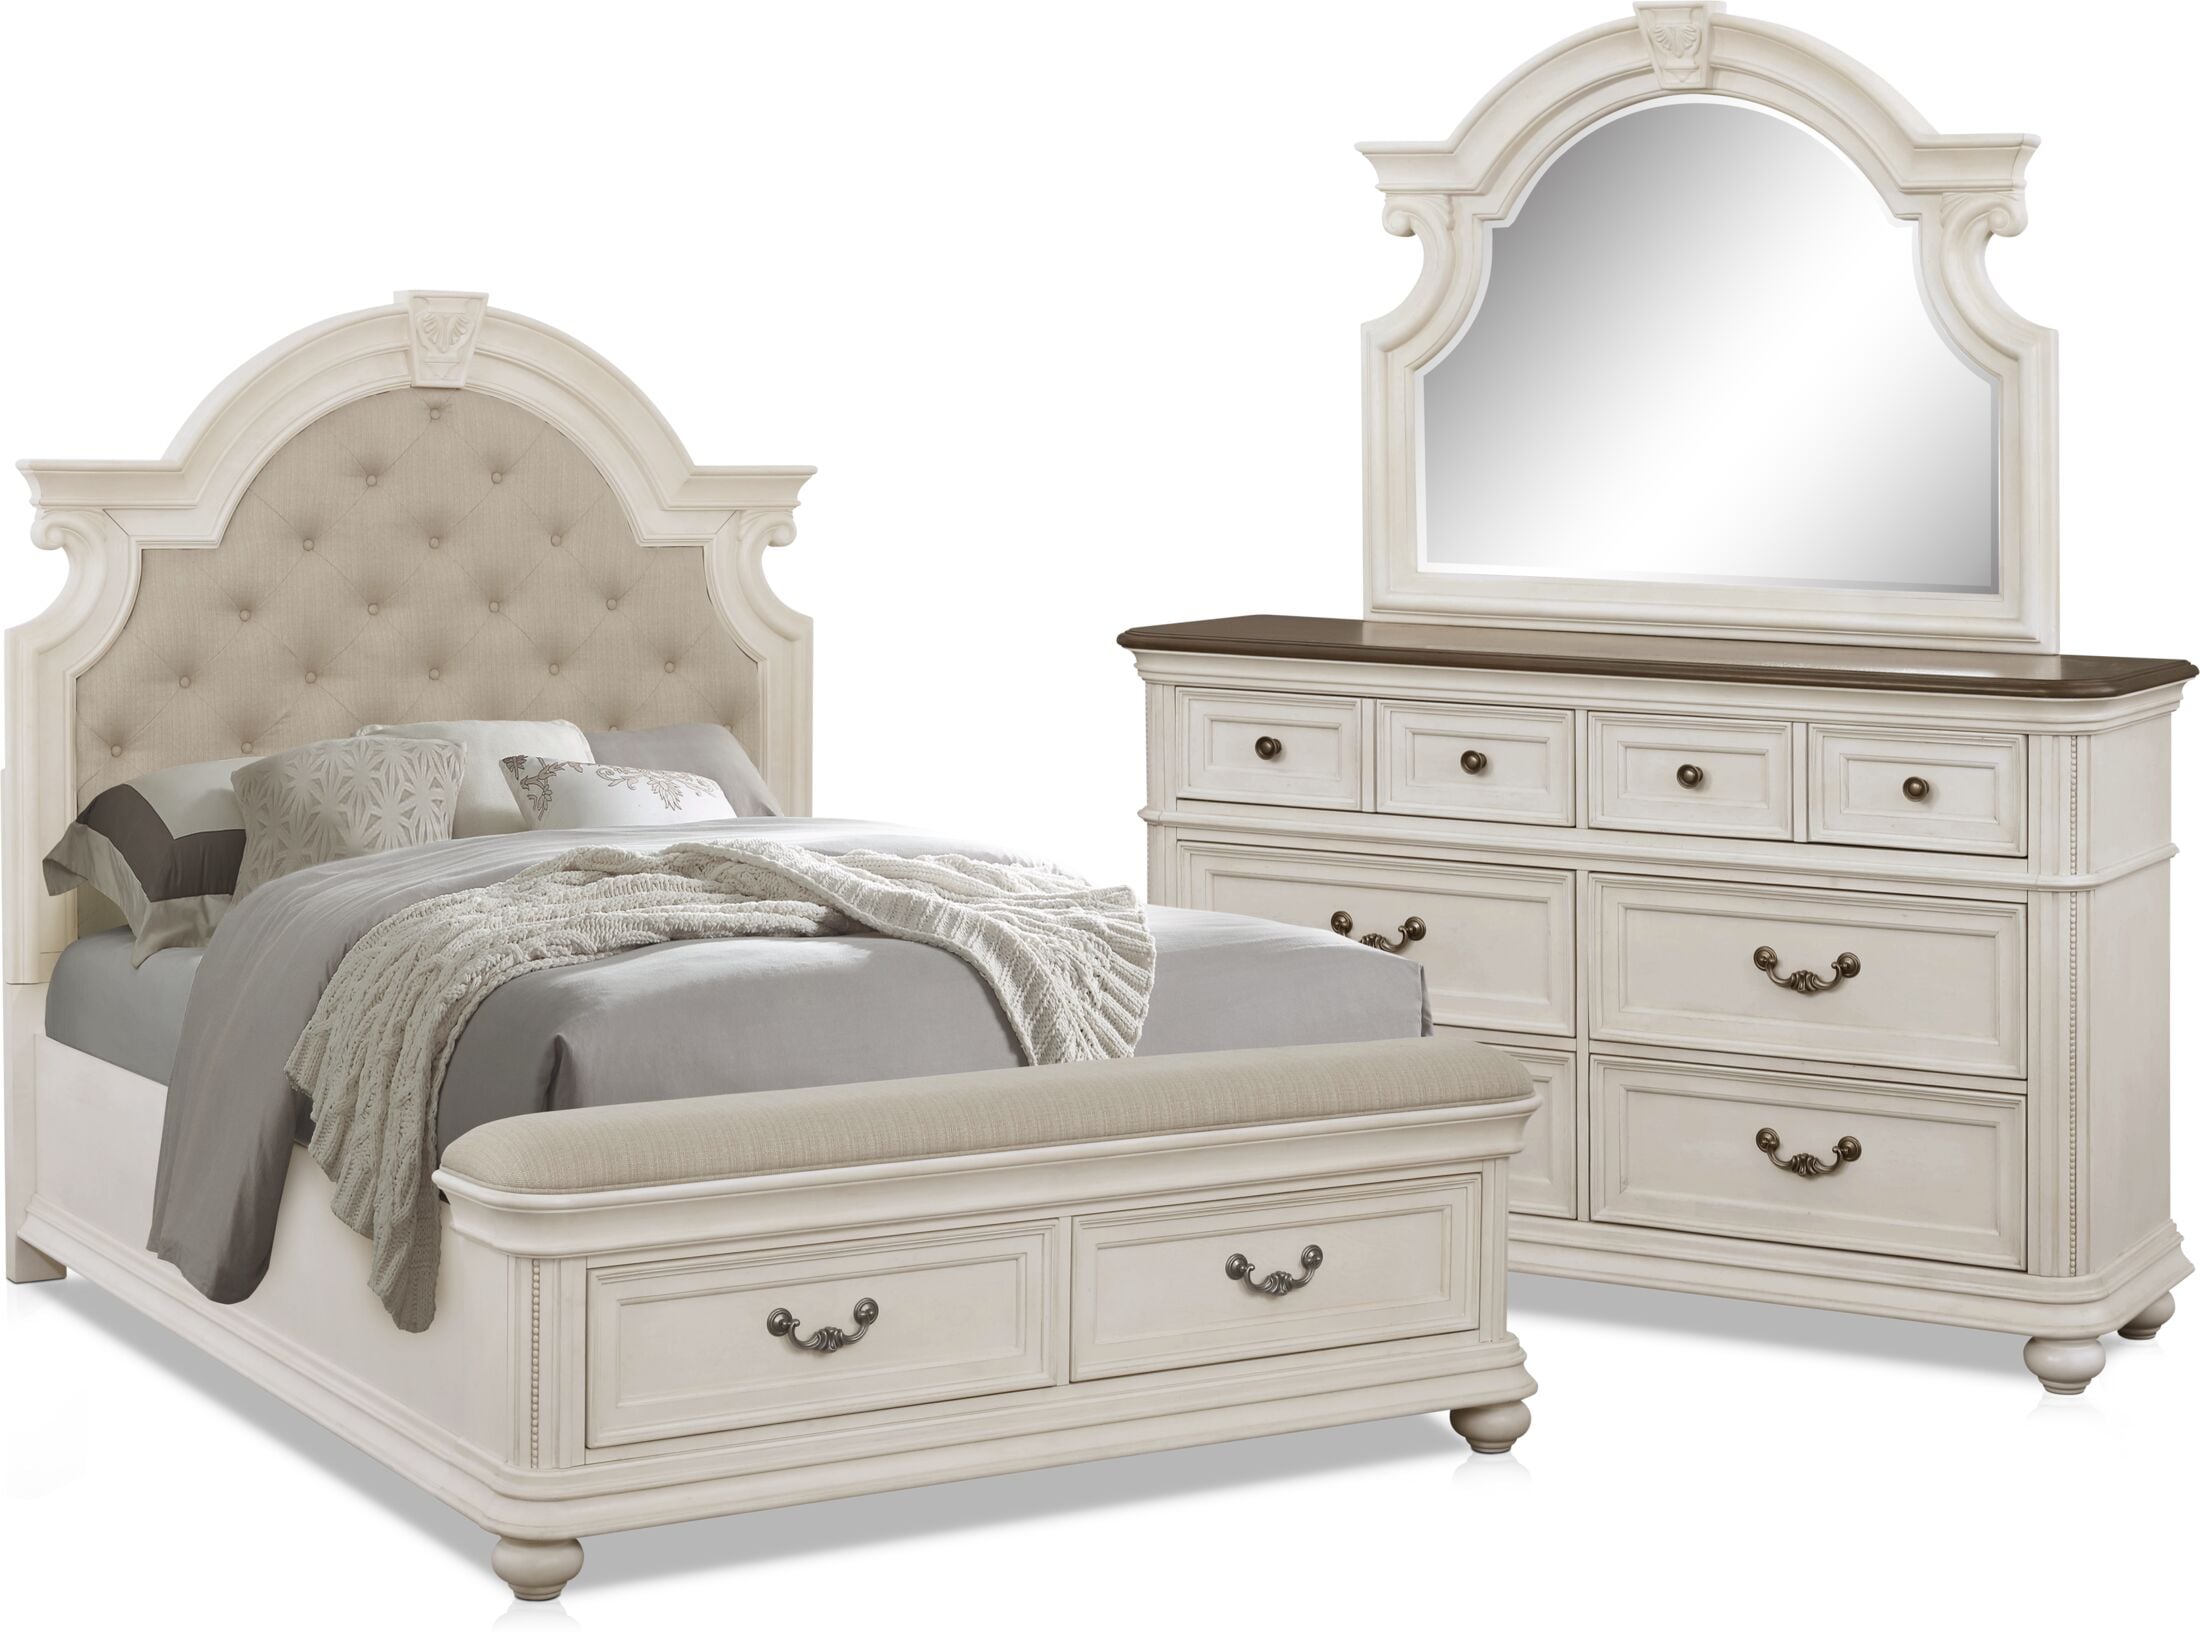 Mayfair 5 Piece Upholstered Storage Bedroom Set with Dresser and 